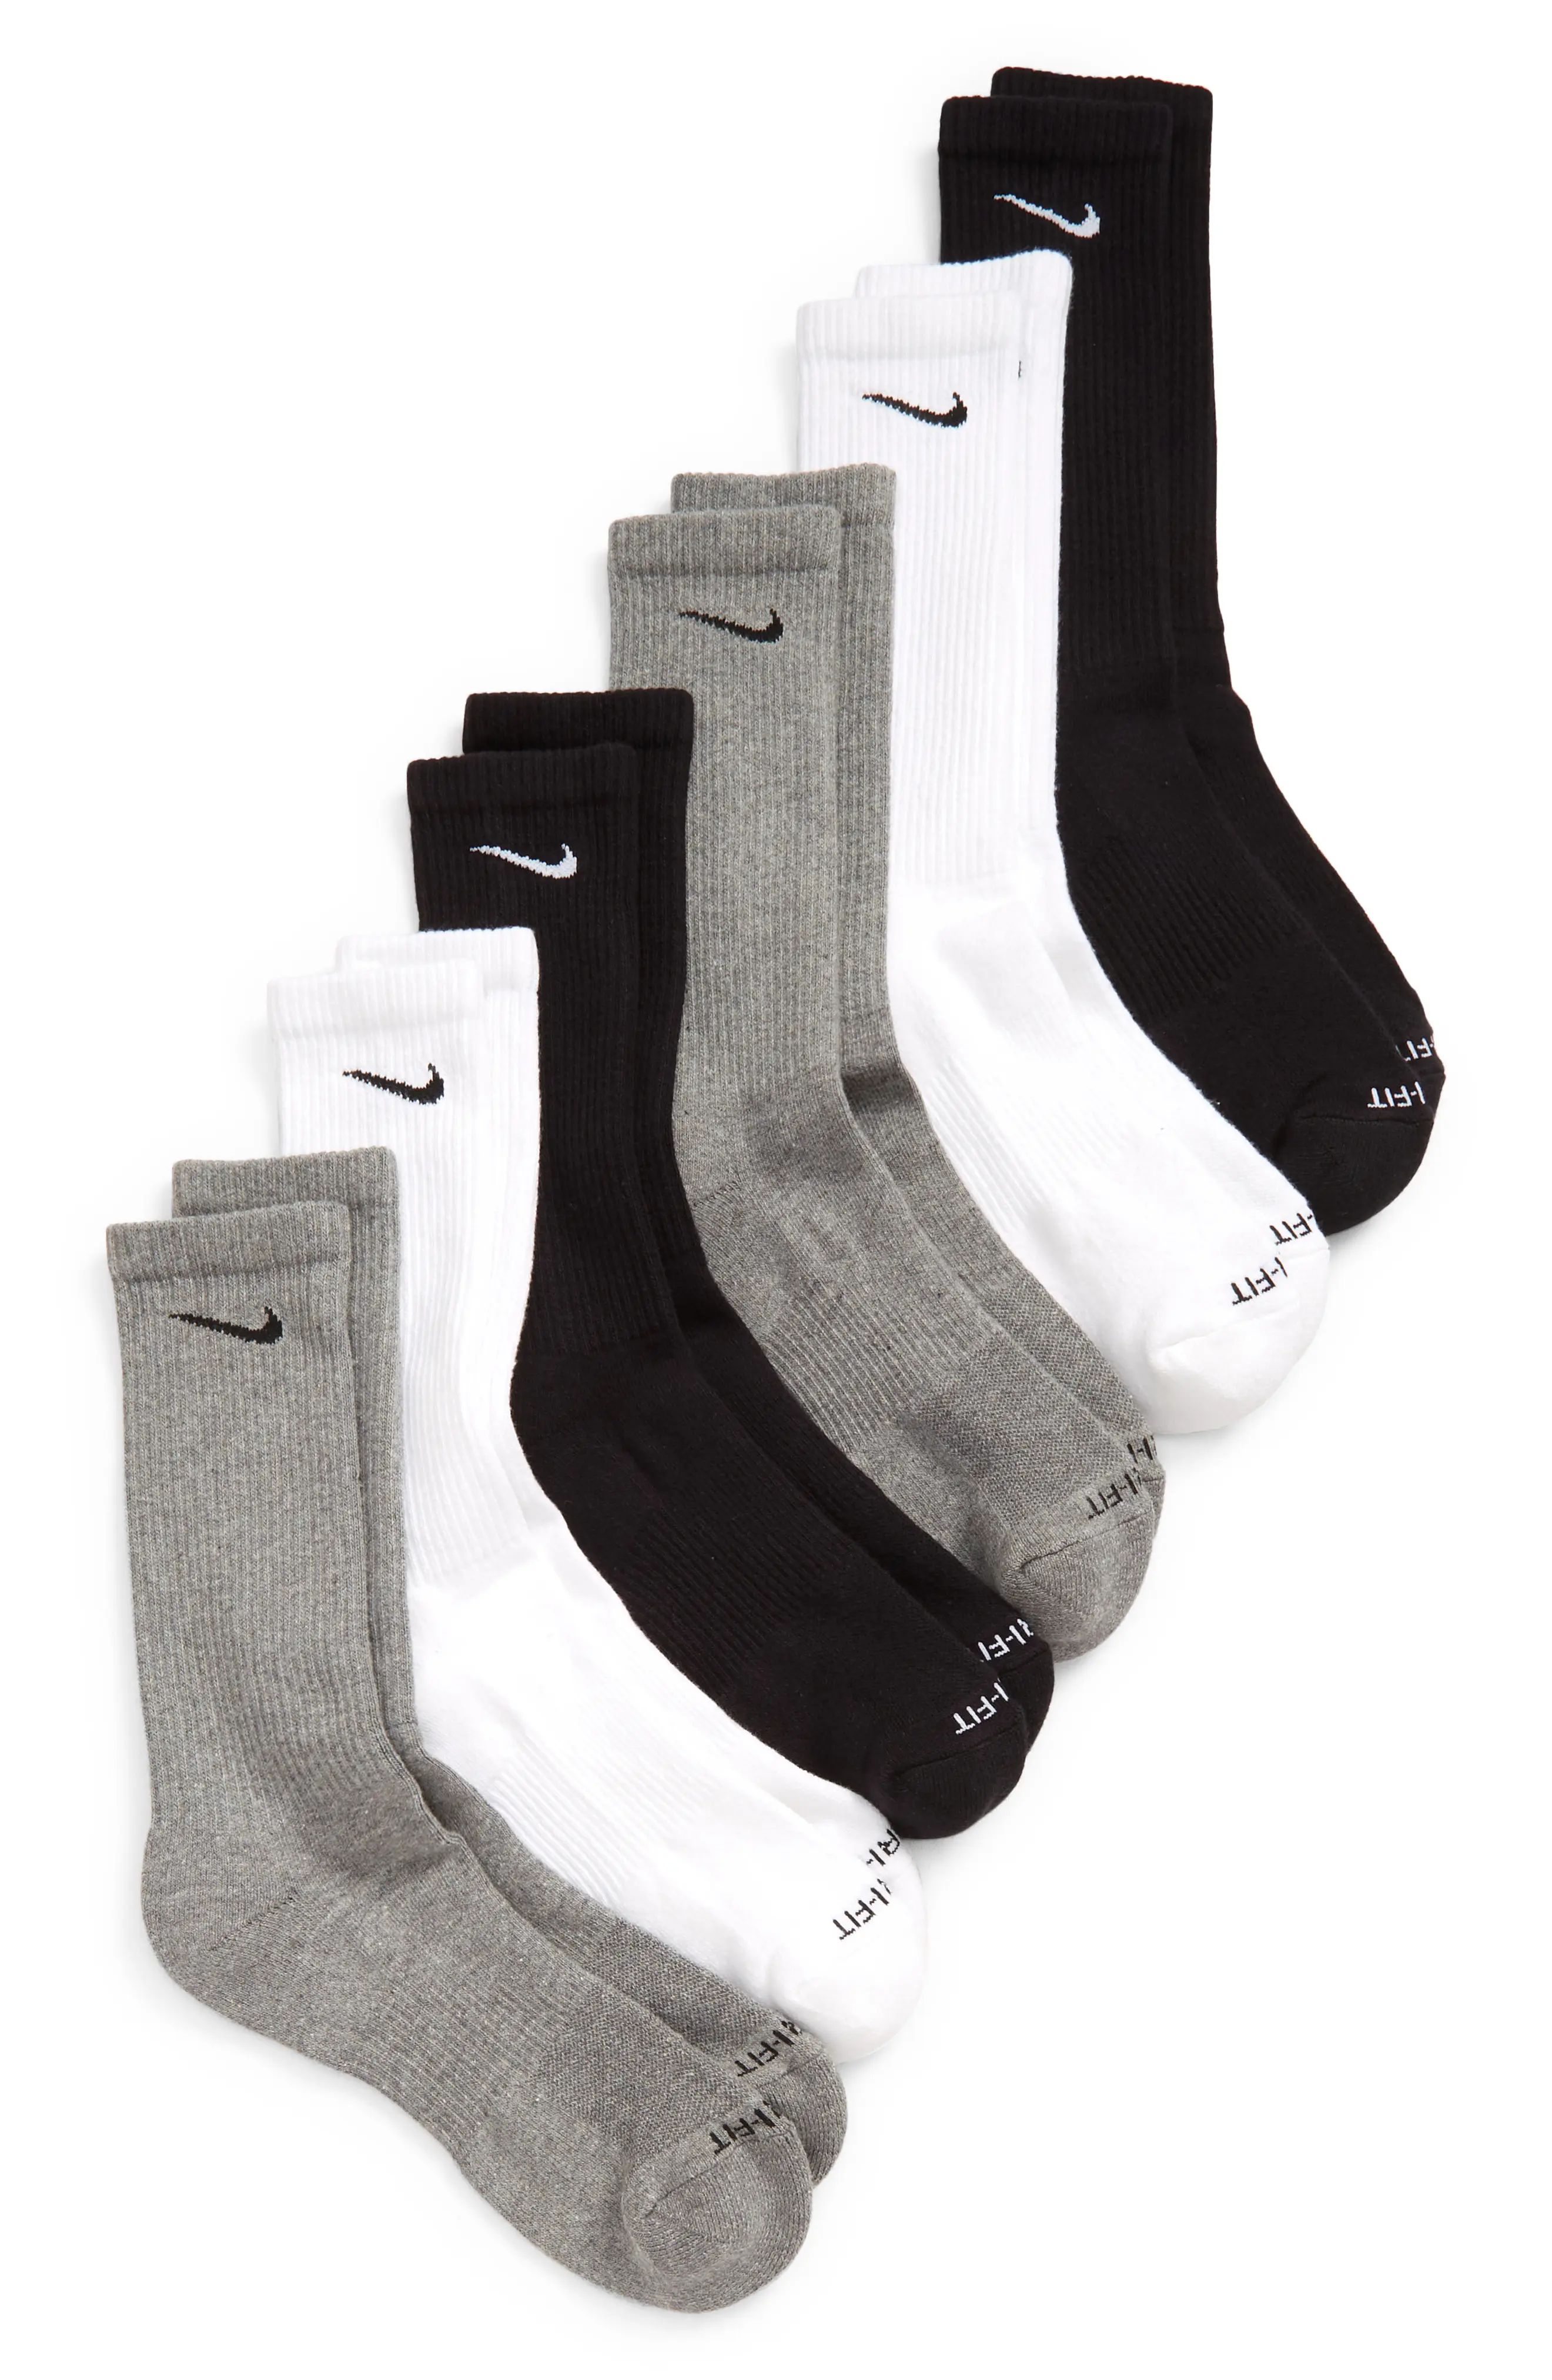 Nike Dry 6-Pack Everyday Plus Cushion Crew Training Socks in Multicolor at Nordstrom, Size Large | Nordstrom